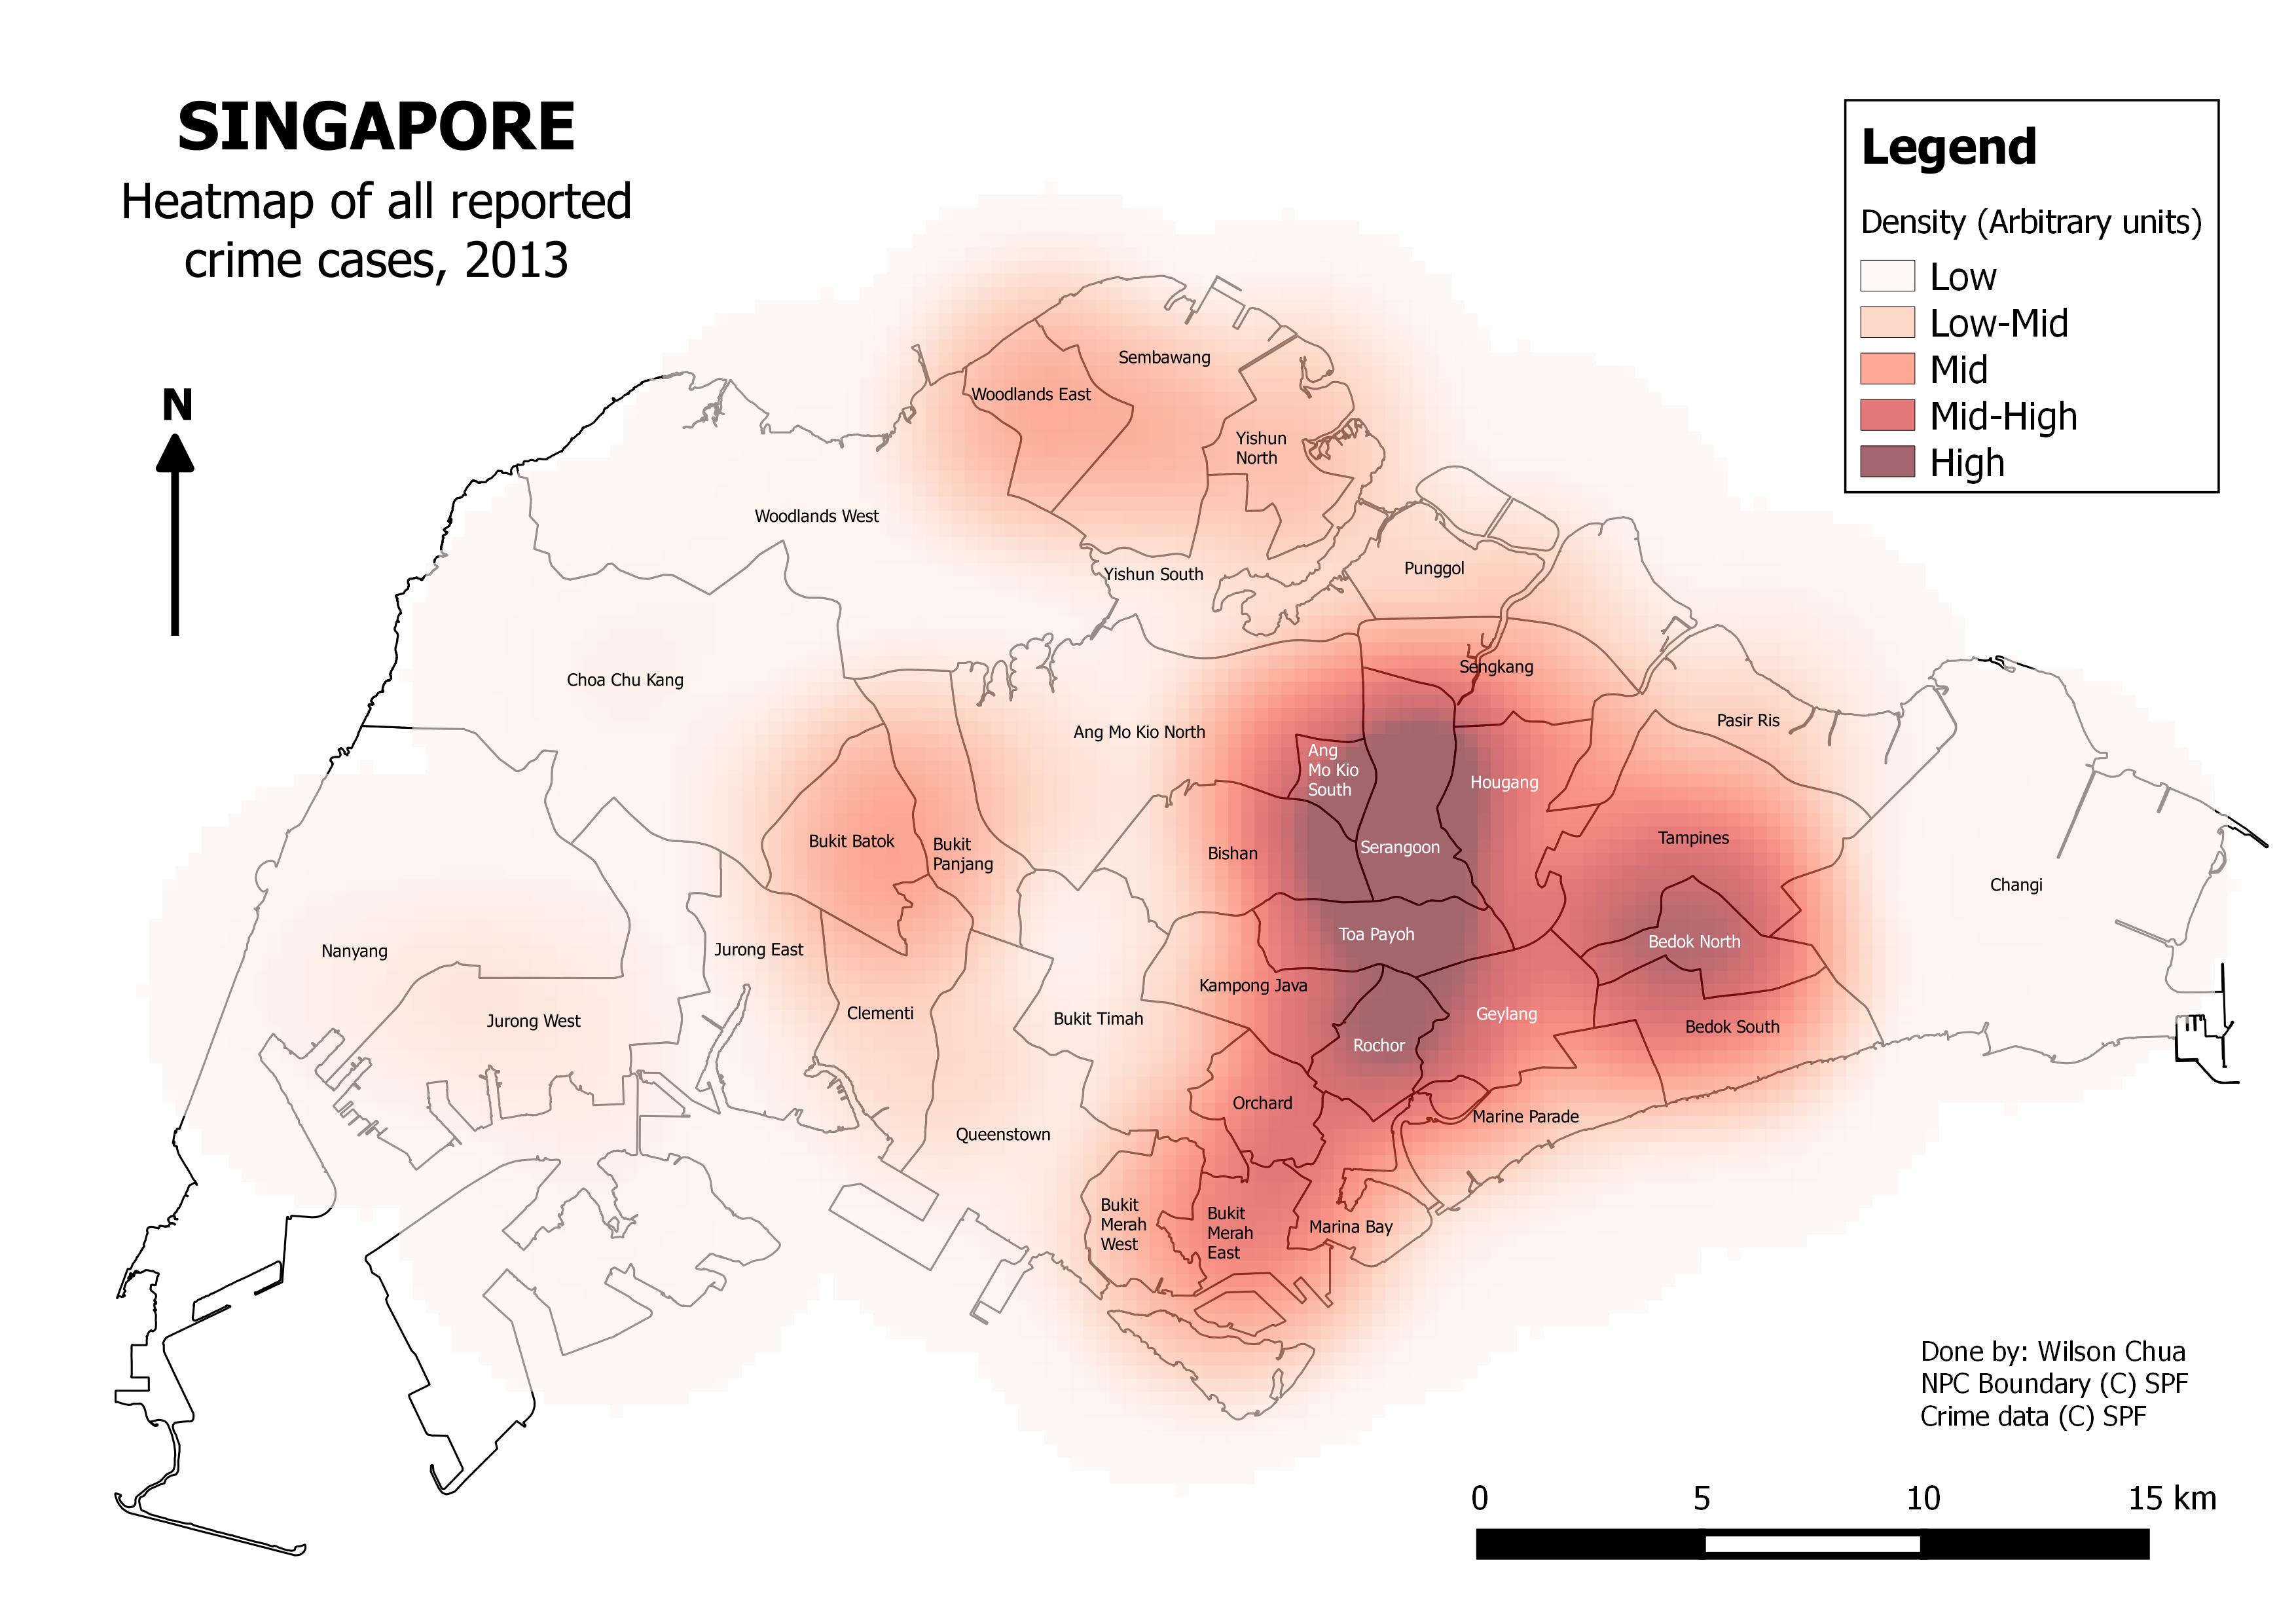 Heatmap of all reported crime cases, 2013